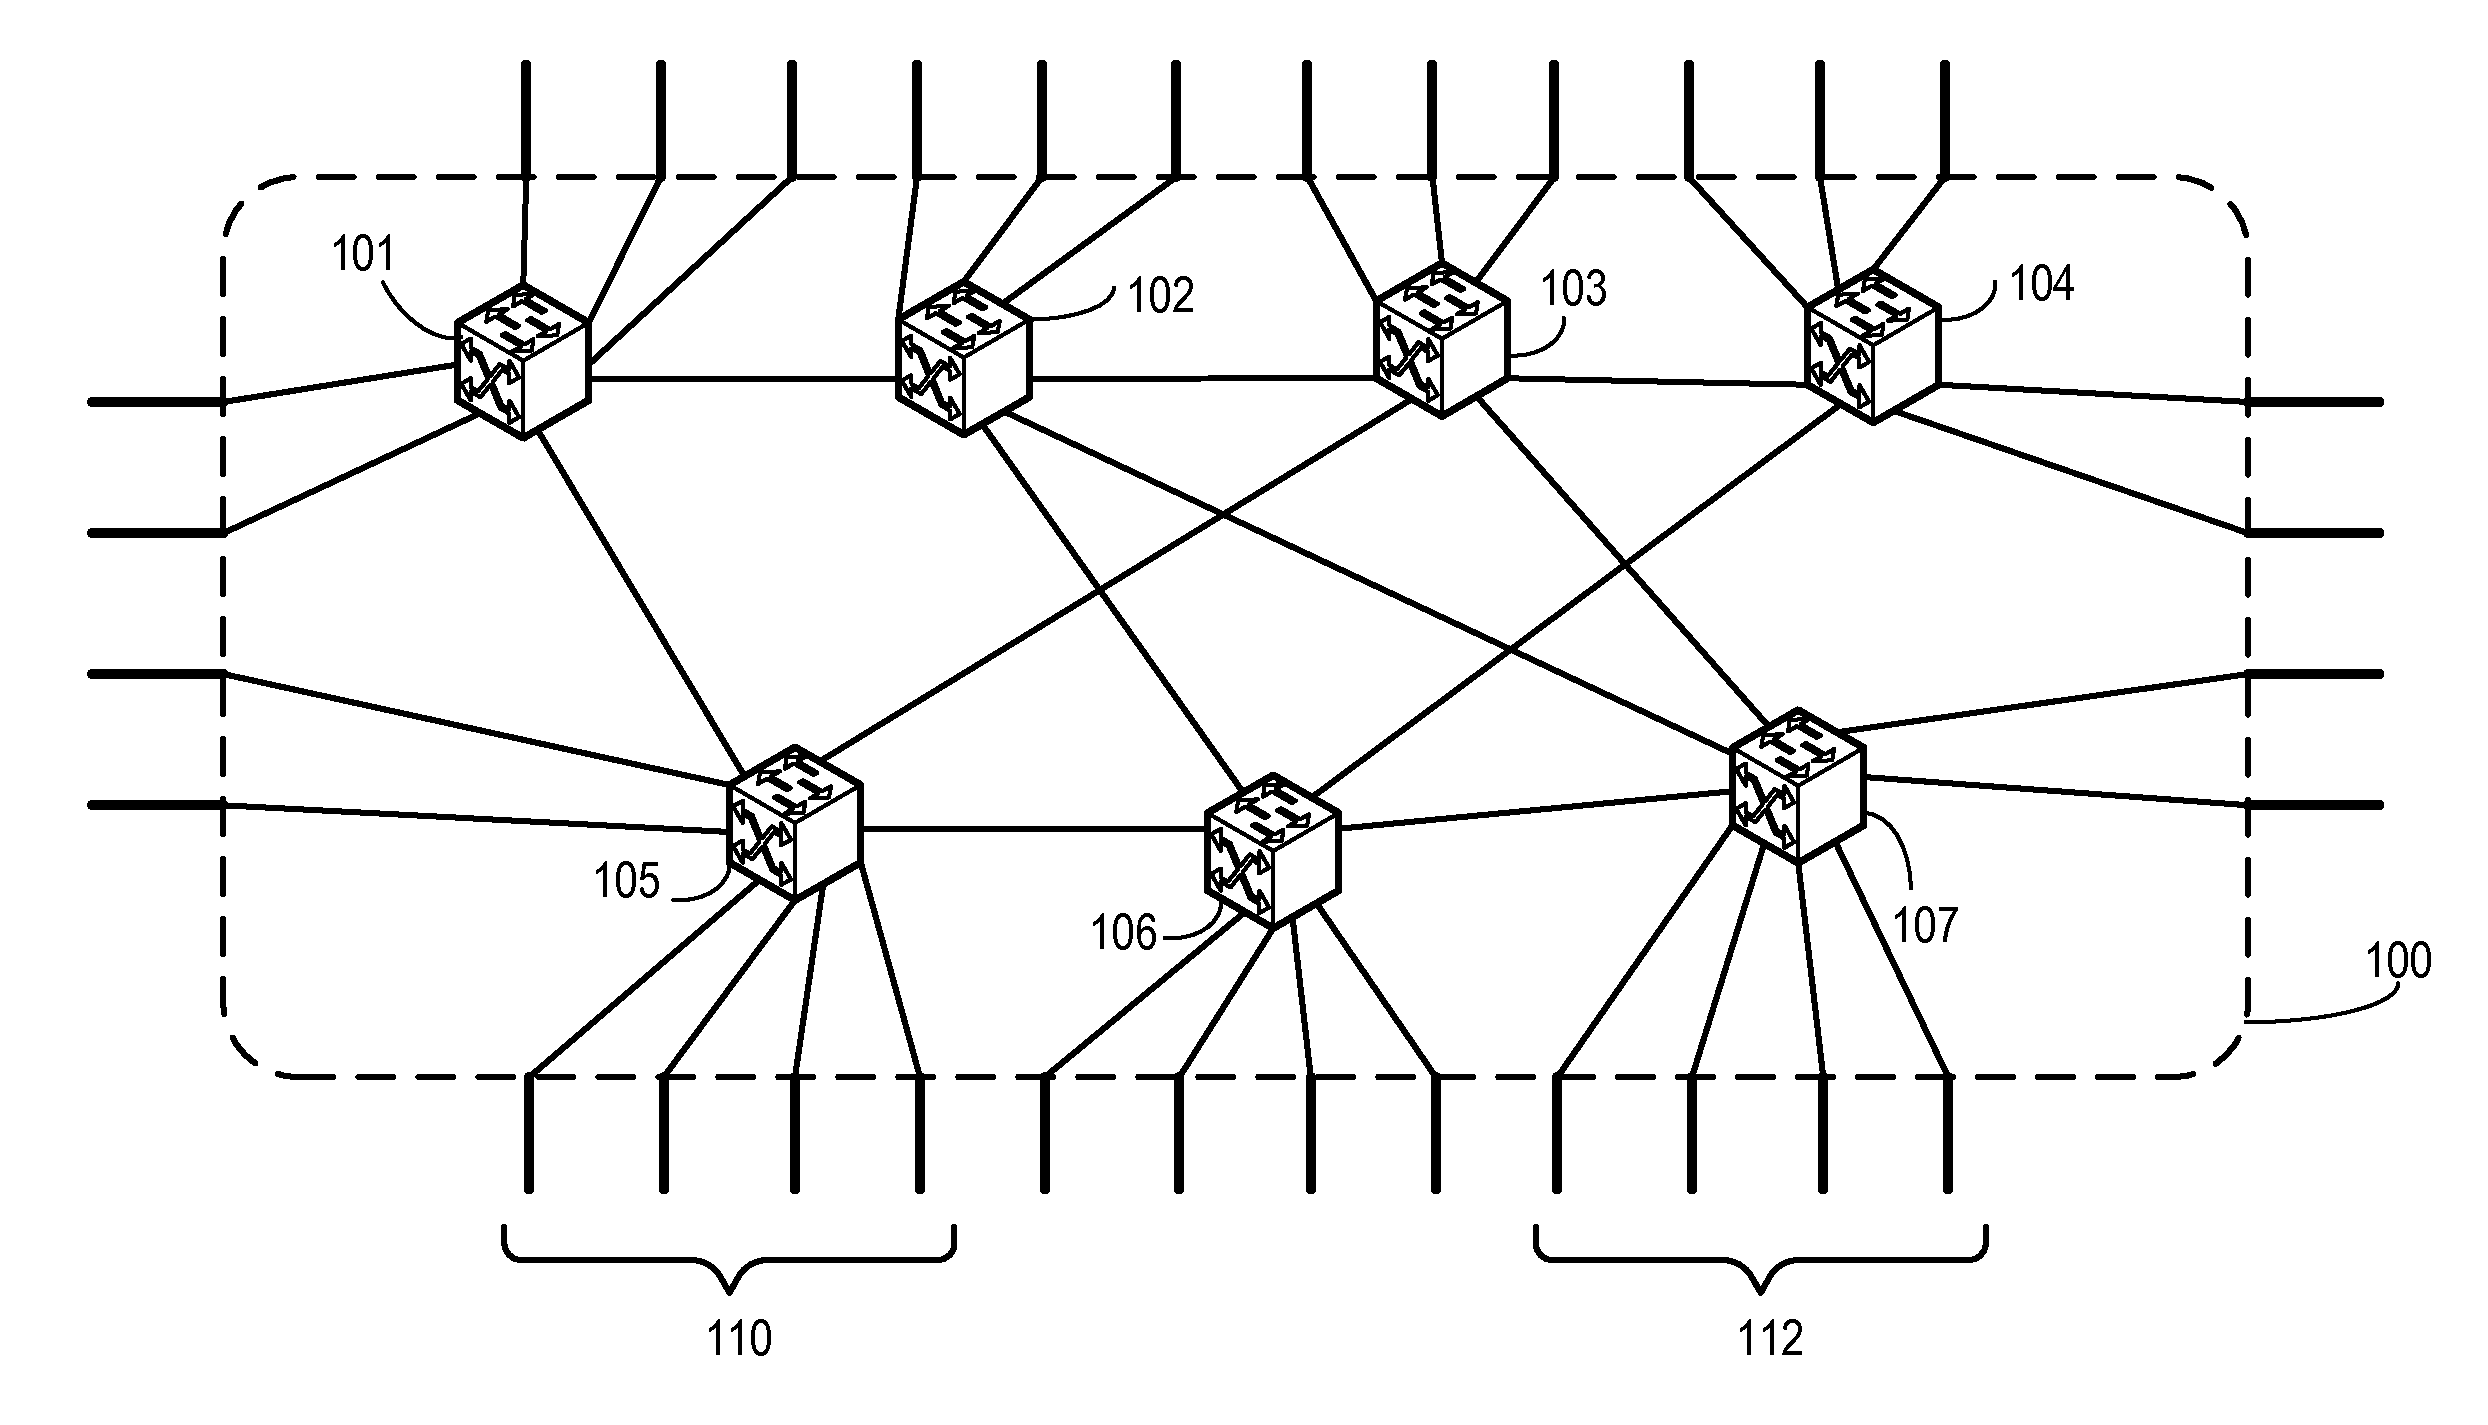 Fabric formation for virtual cluster switching